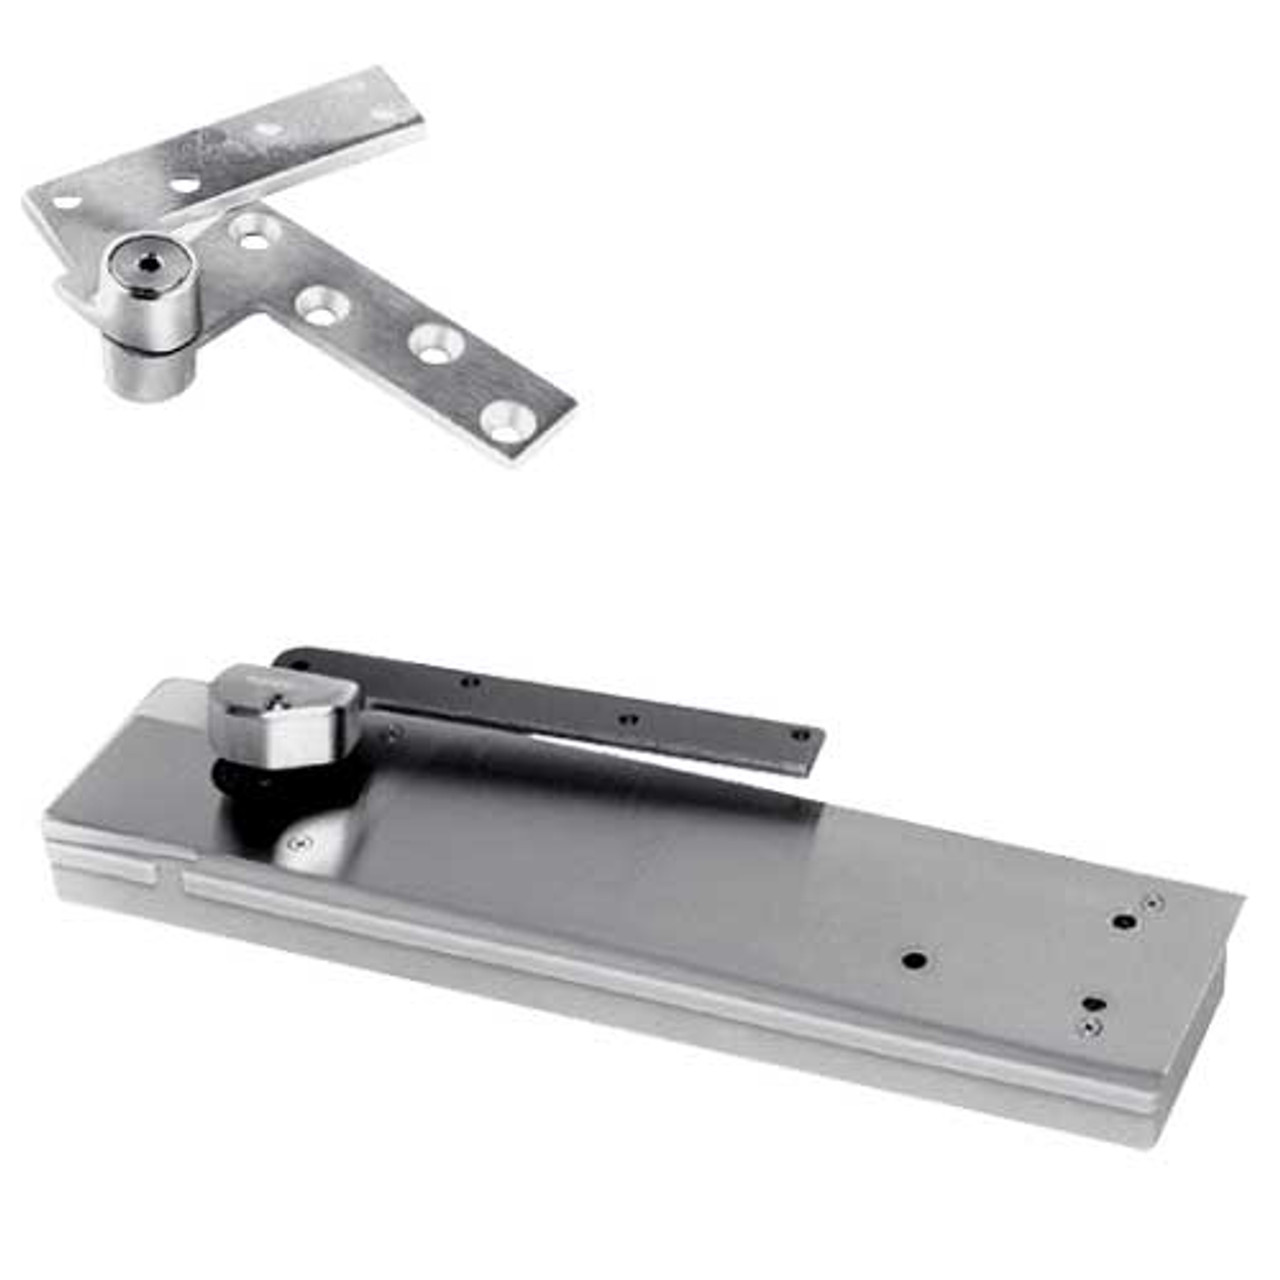 5103ABC105-LCC-LH-626 Rixson 51 Series 3/4" Offset Hung Shallow Depth Floor Closers in Satin Chrome Finish